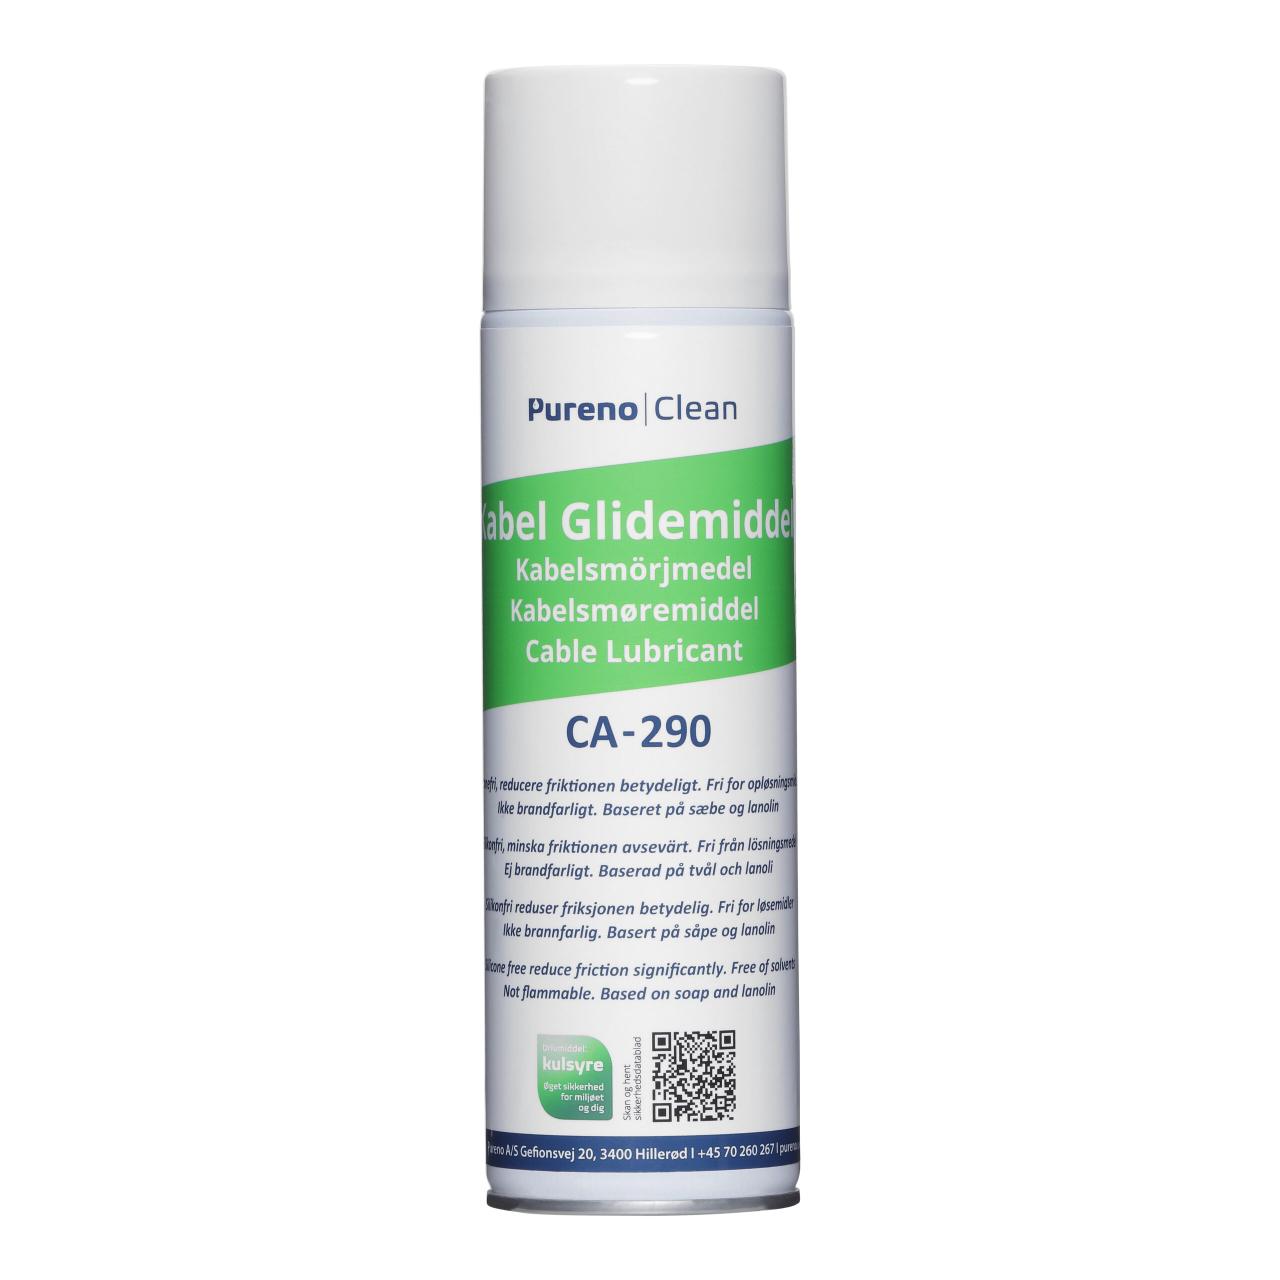 SILICONE-FREE CABLE LUBRICANT CA-290